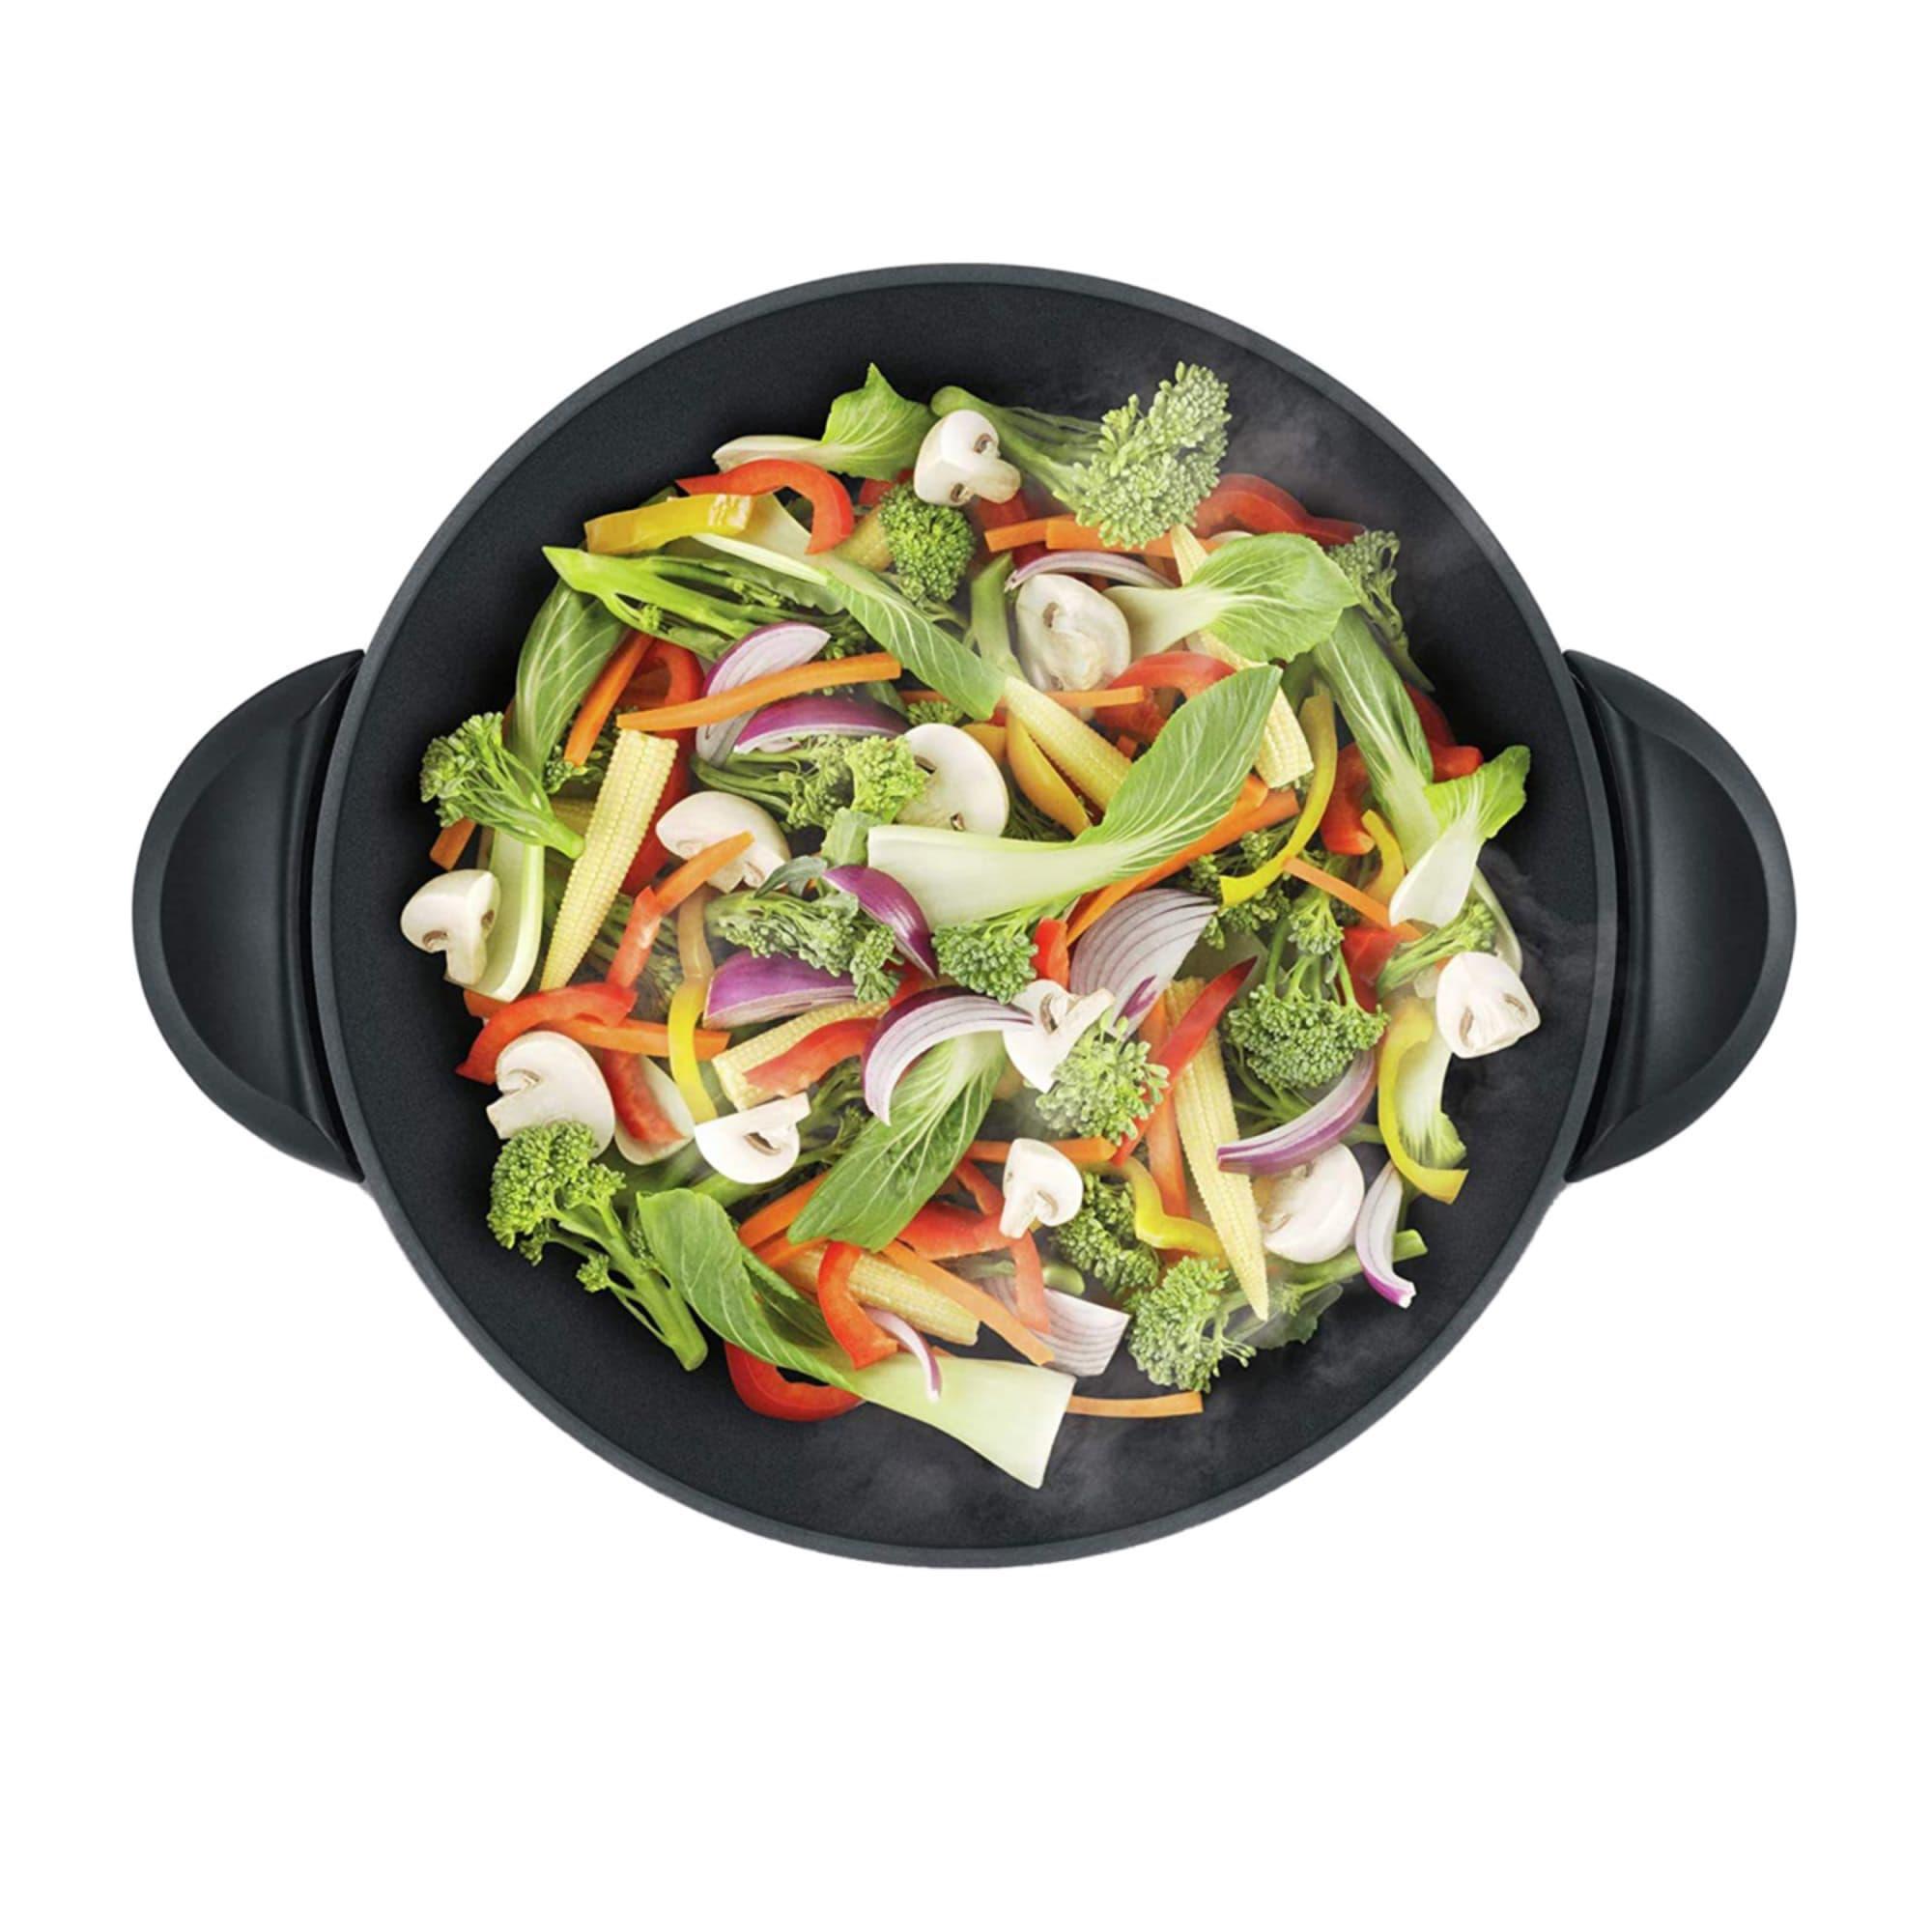 Breville The Hot Wok & Steam 51cm Brushed Stainless Steel Image 4